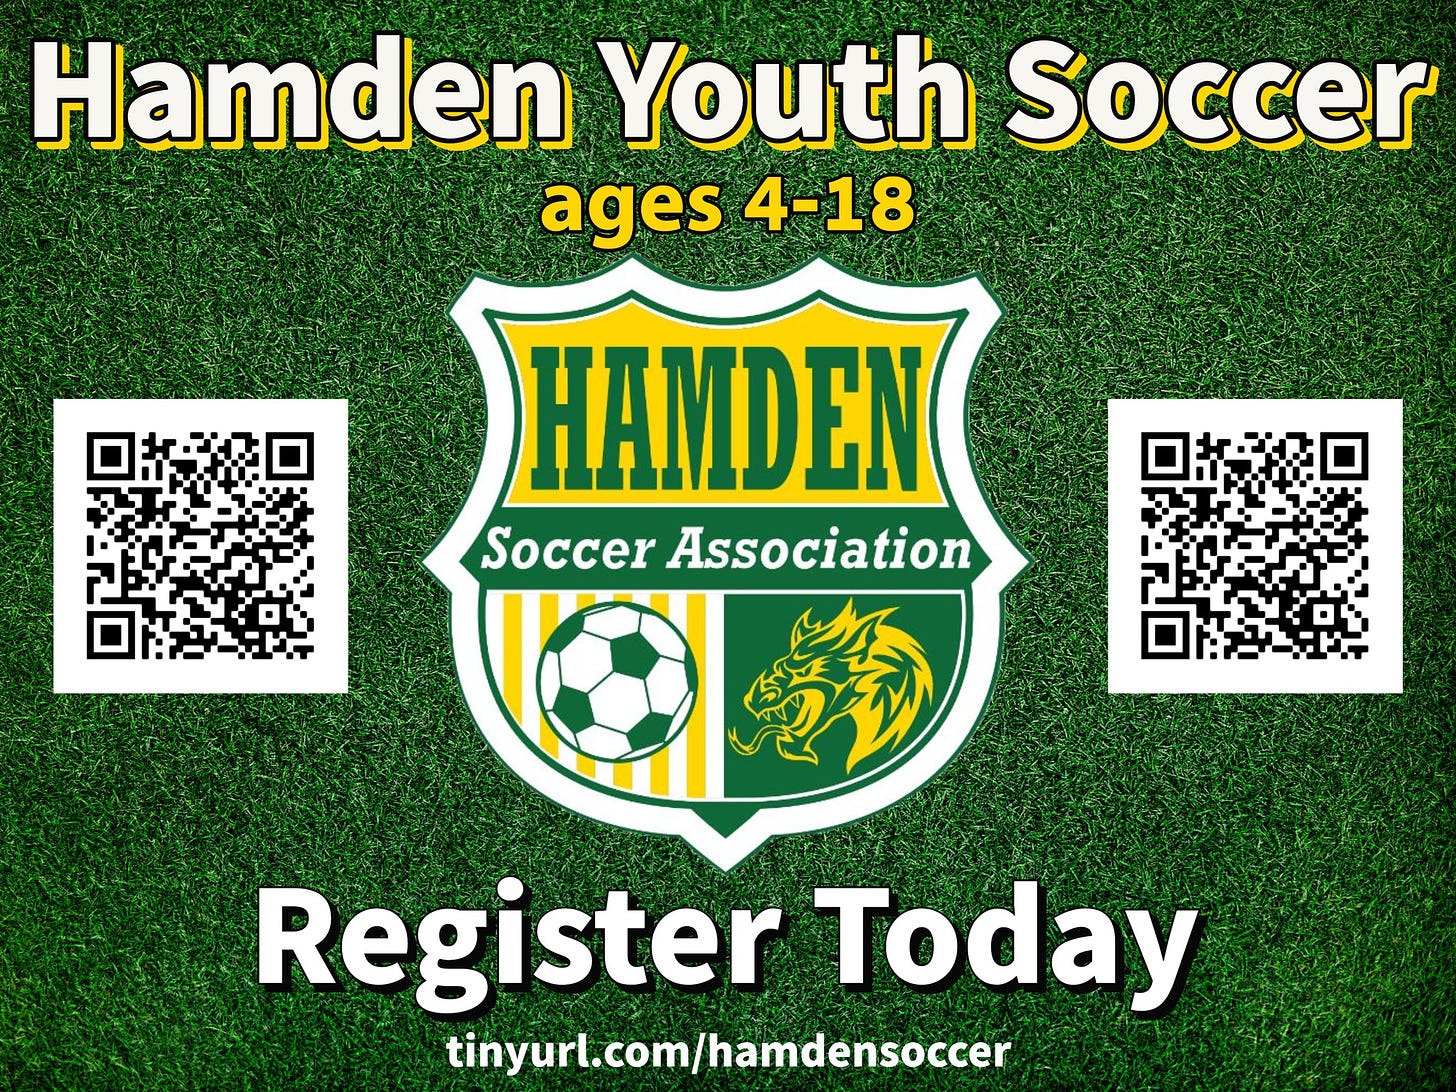 May be an image of soccer, football and text that says 'Hamden Youth Soccer ages 4-18 HAMDEN Û Register Today tinyurl.com/hamdensoccer'